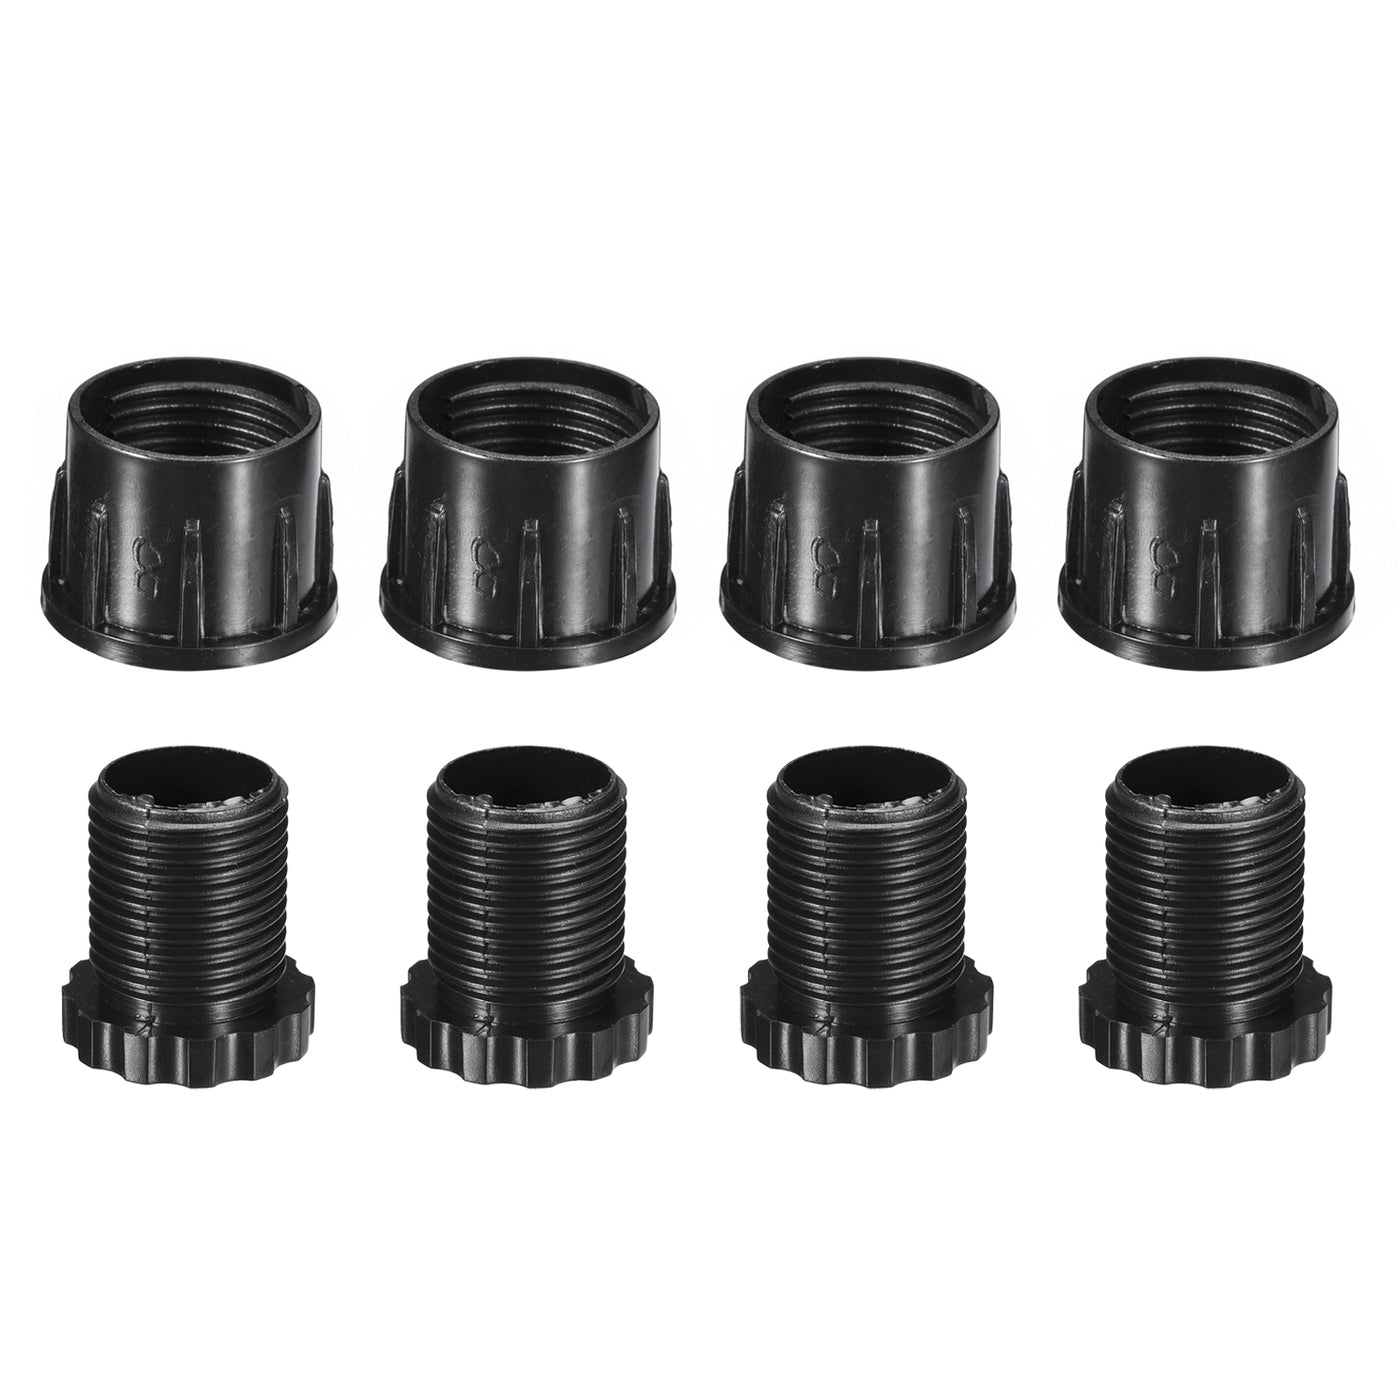 uxcell Uxcell 4Pcs Inserts for Round Tubes with Leveling Feet, for 38mm/1.5" Dia Round Tube